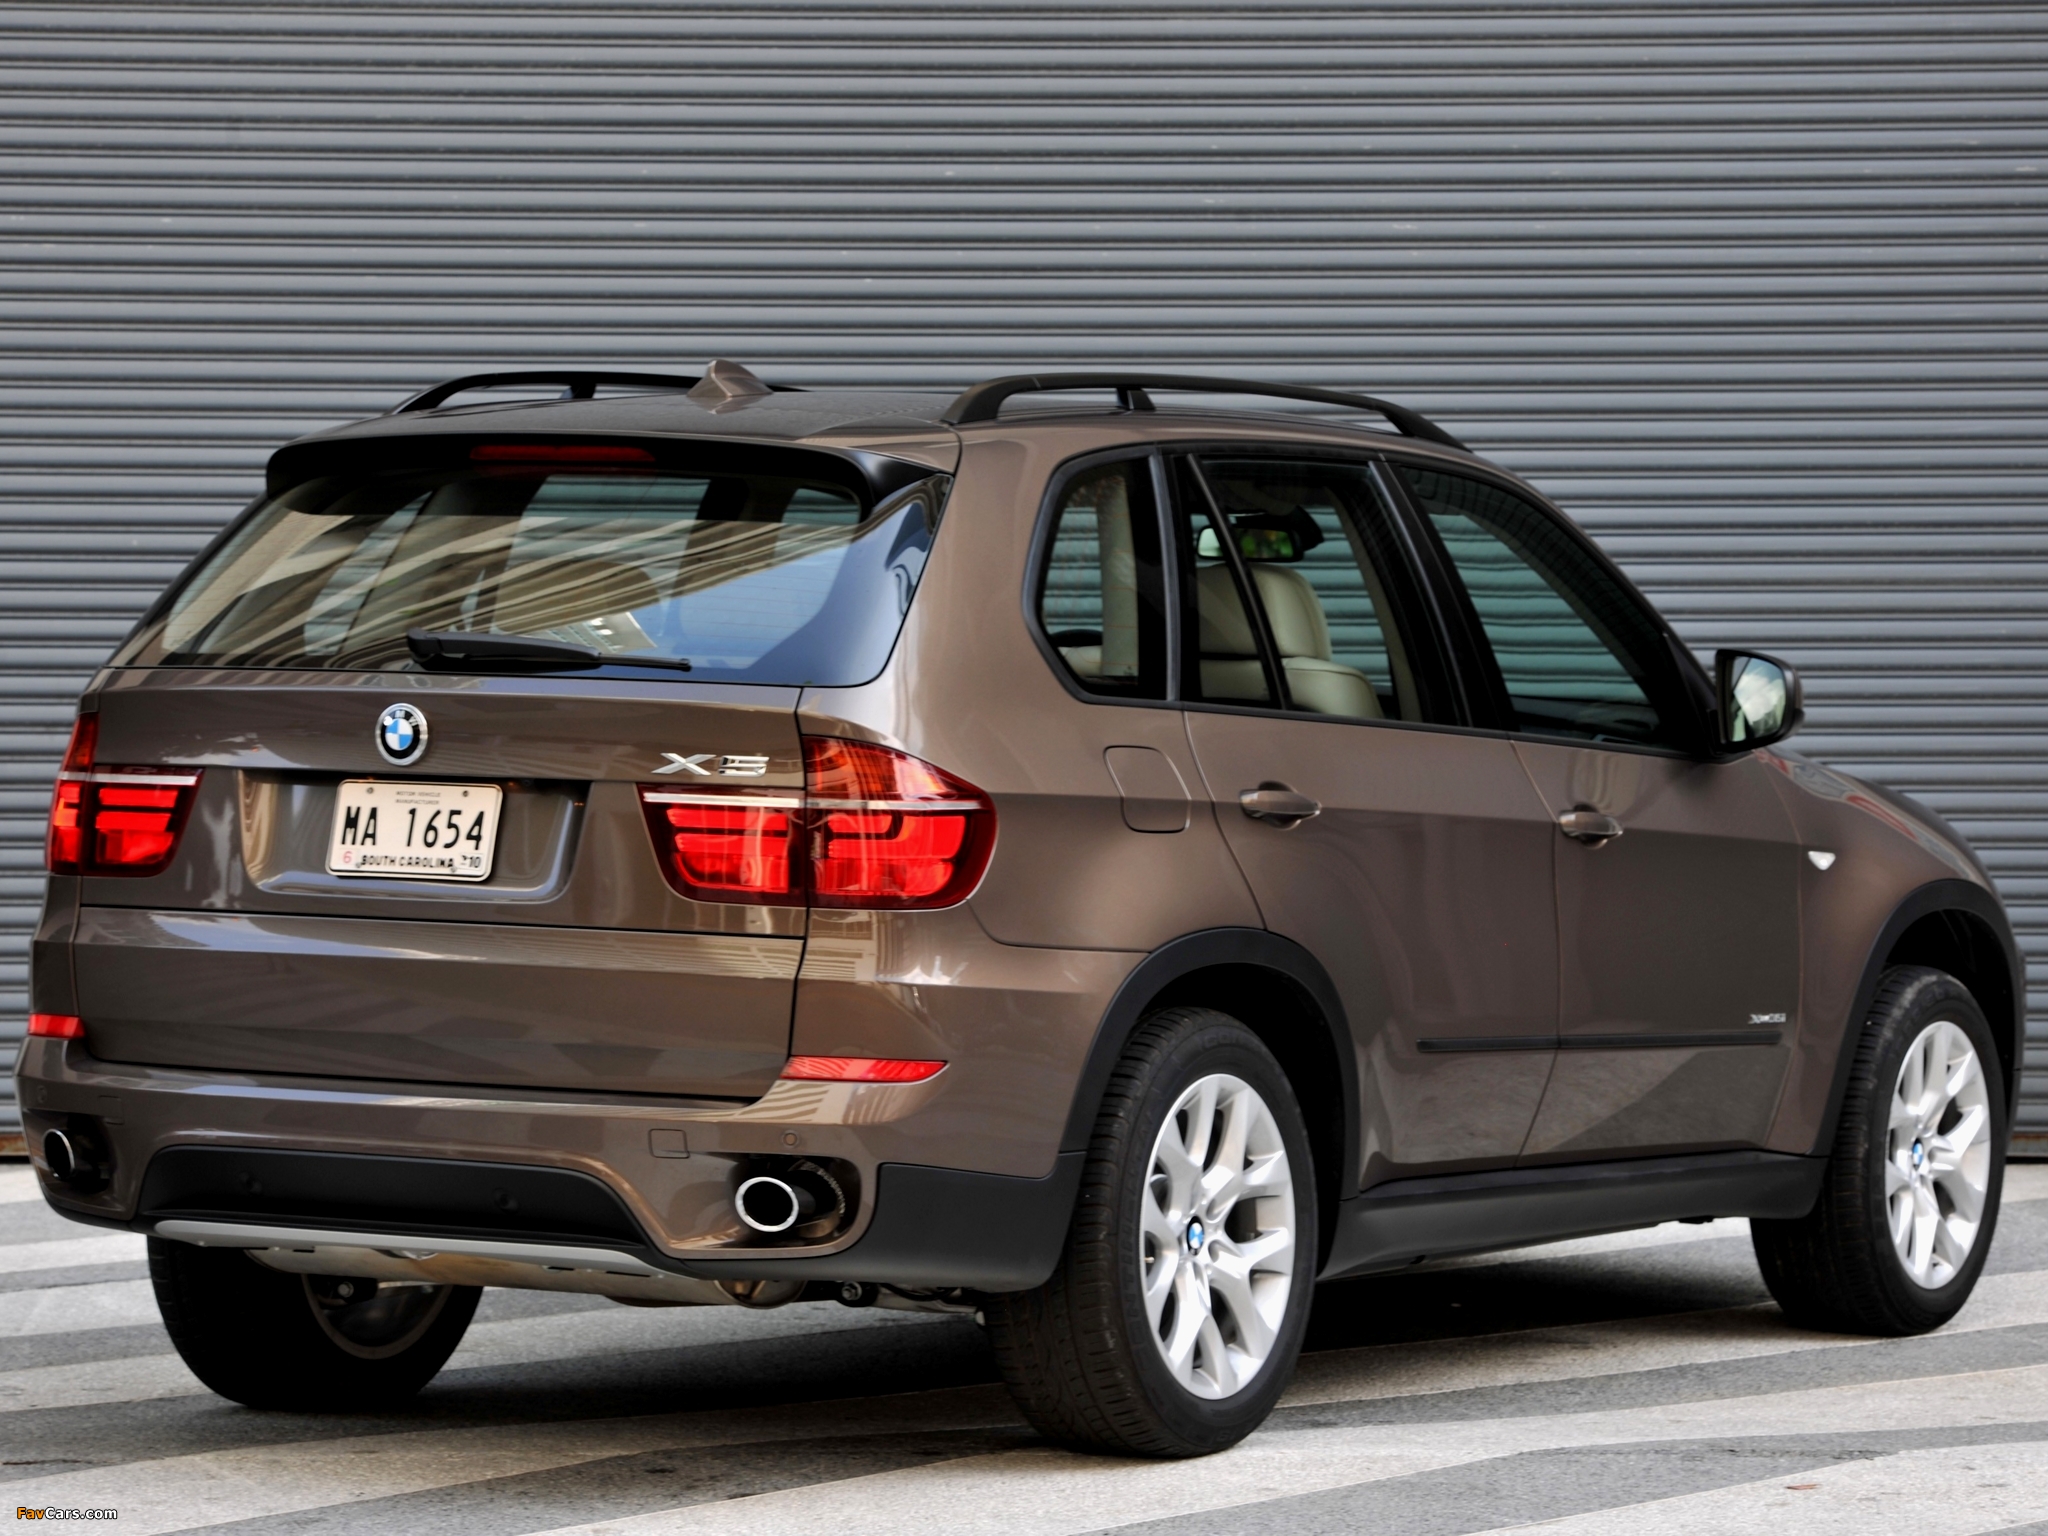 BMW X5 xDrive35i (E70) 2010 pictures (2048 x 1536)